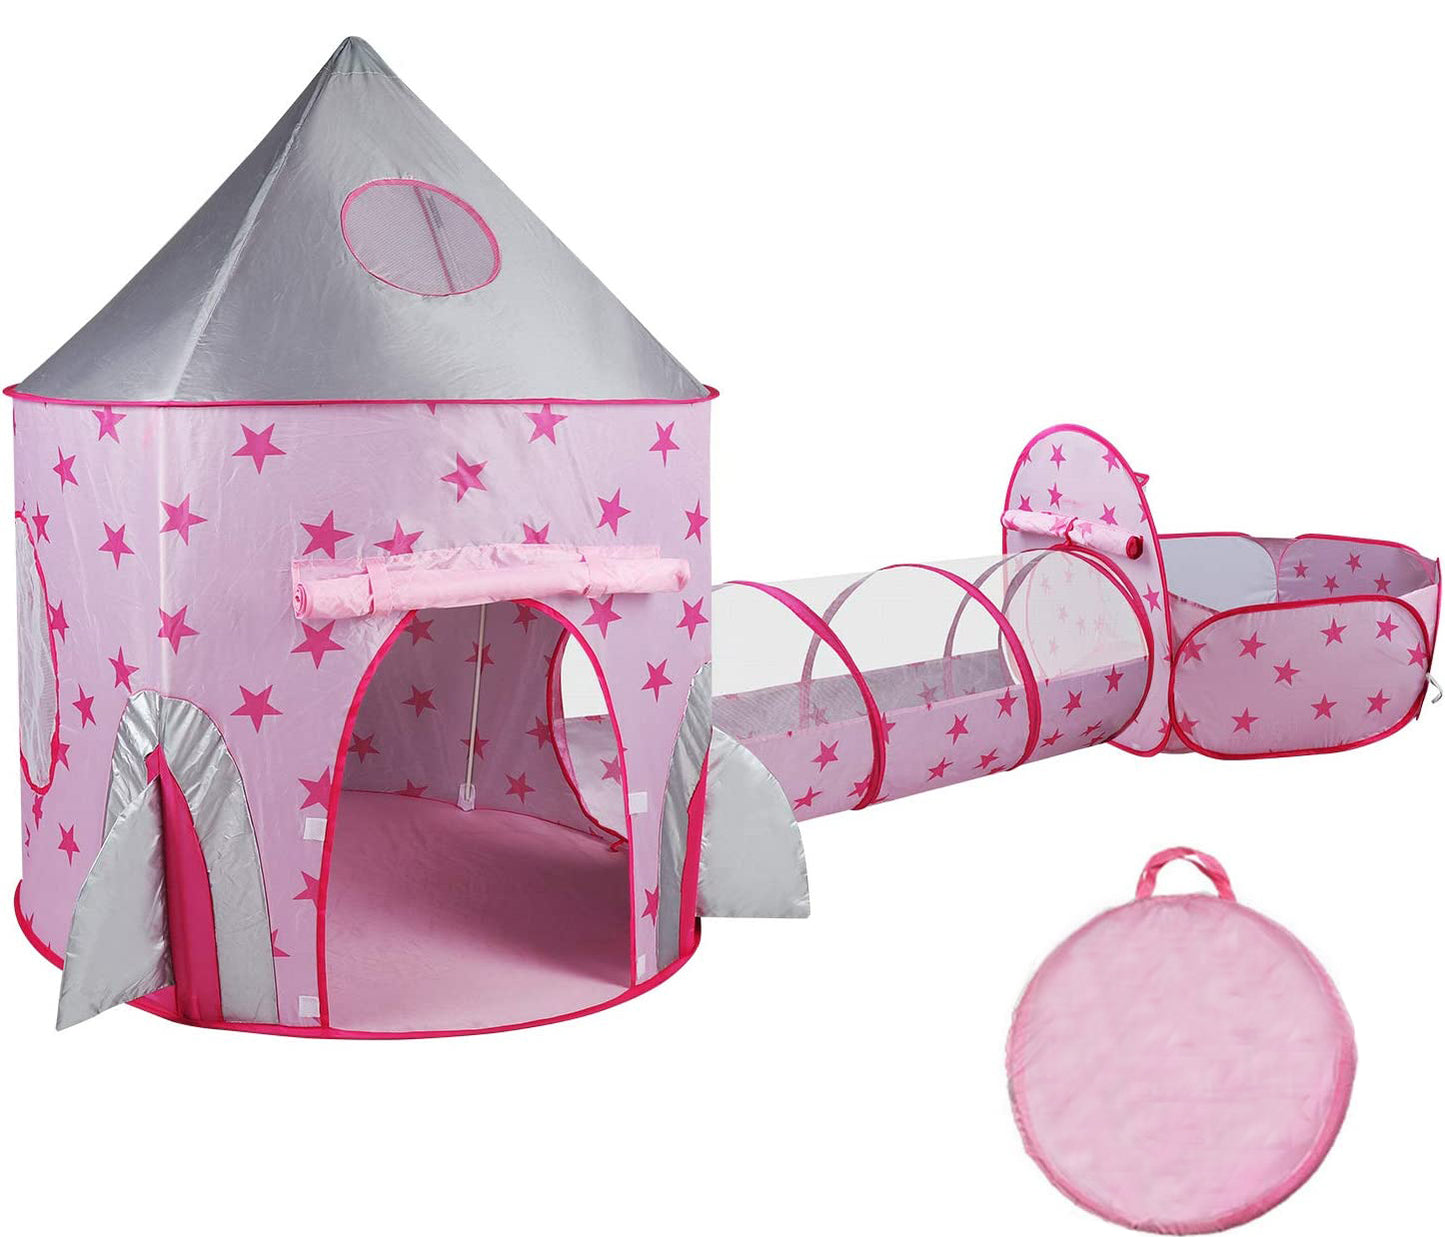 Piggy Poo and Crew Pop Up Play Tunnel and Ball Pit Game - Comes with 50 Balls